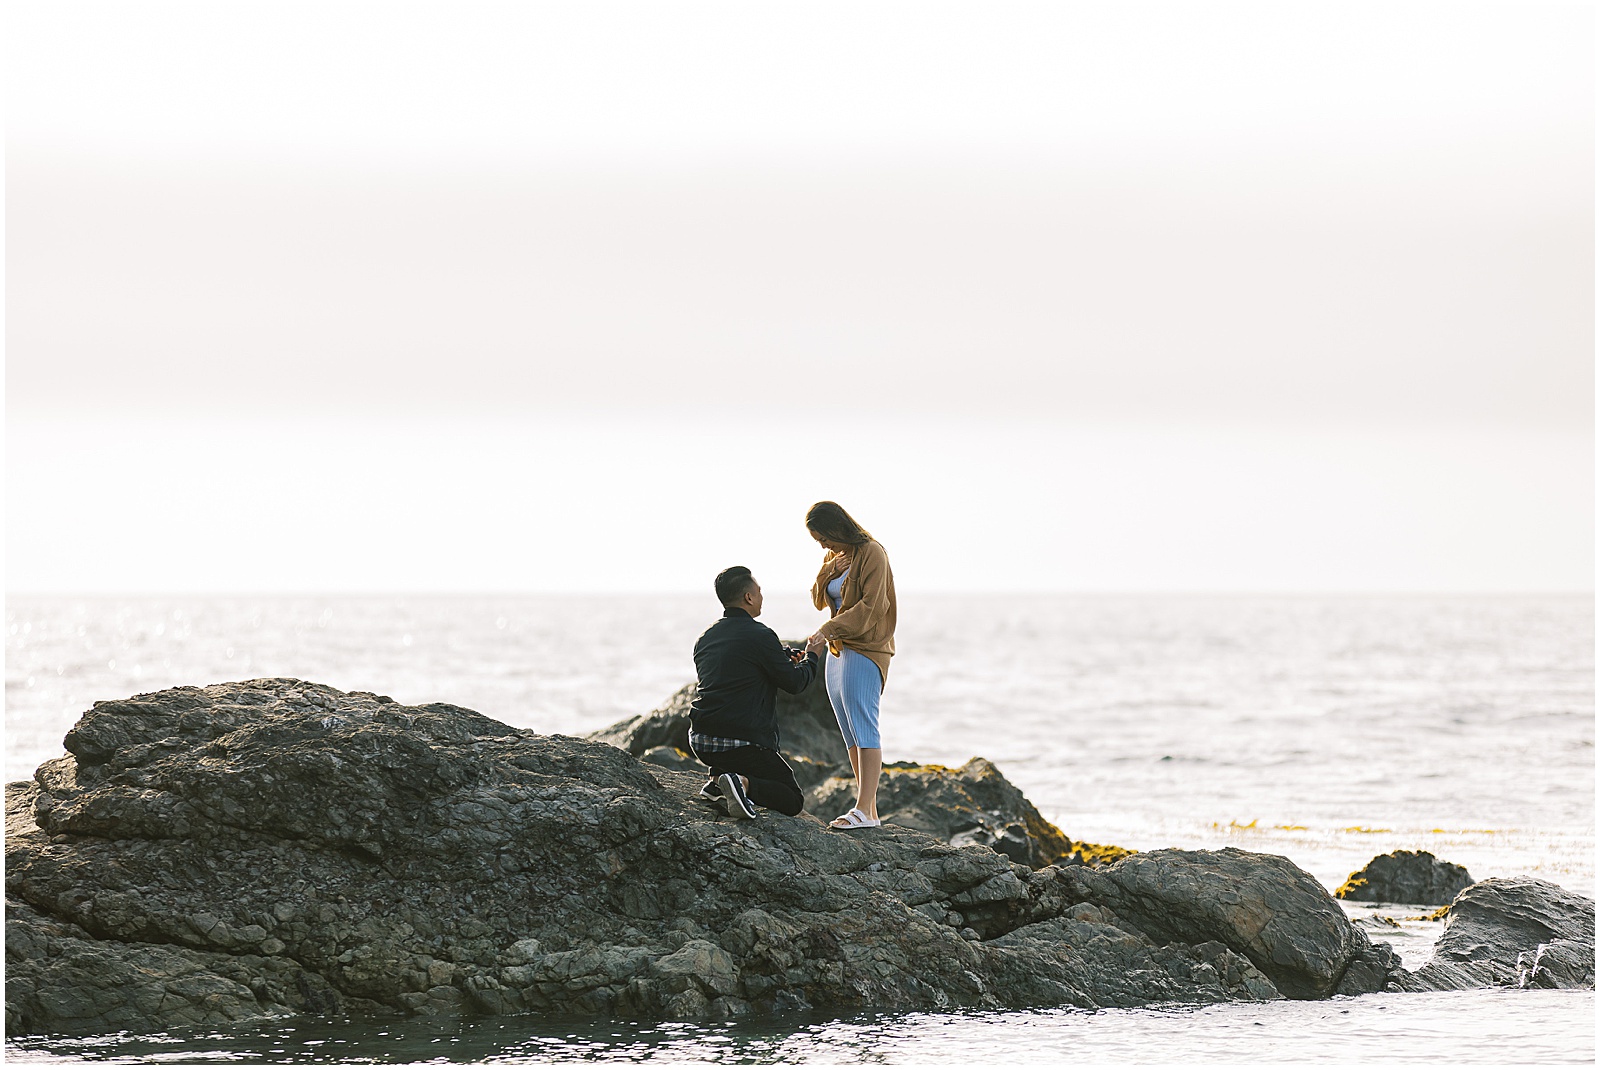 Man proposing to woman on the beach by film photographer AGS Photo Art